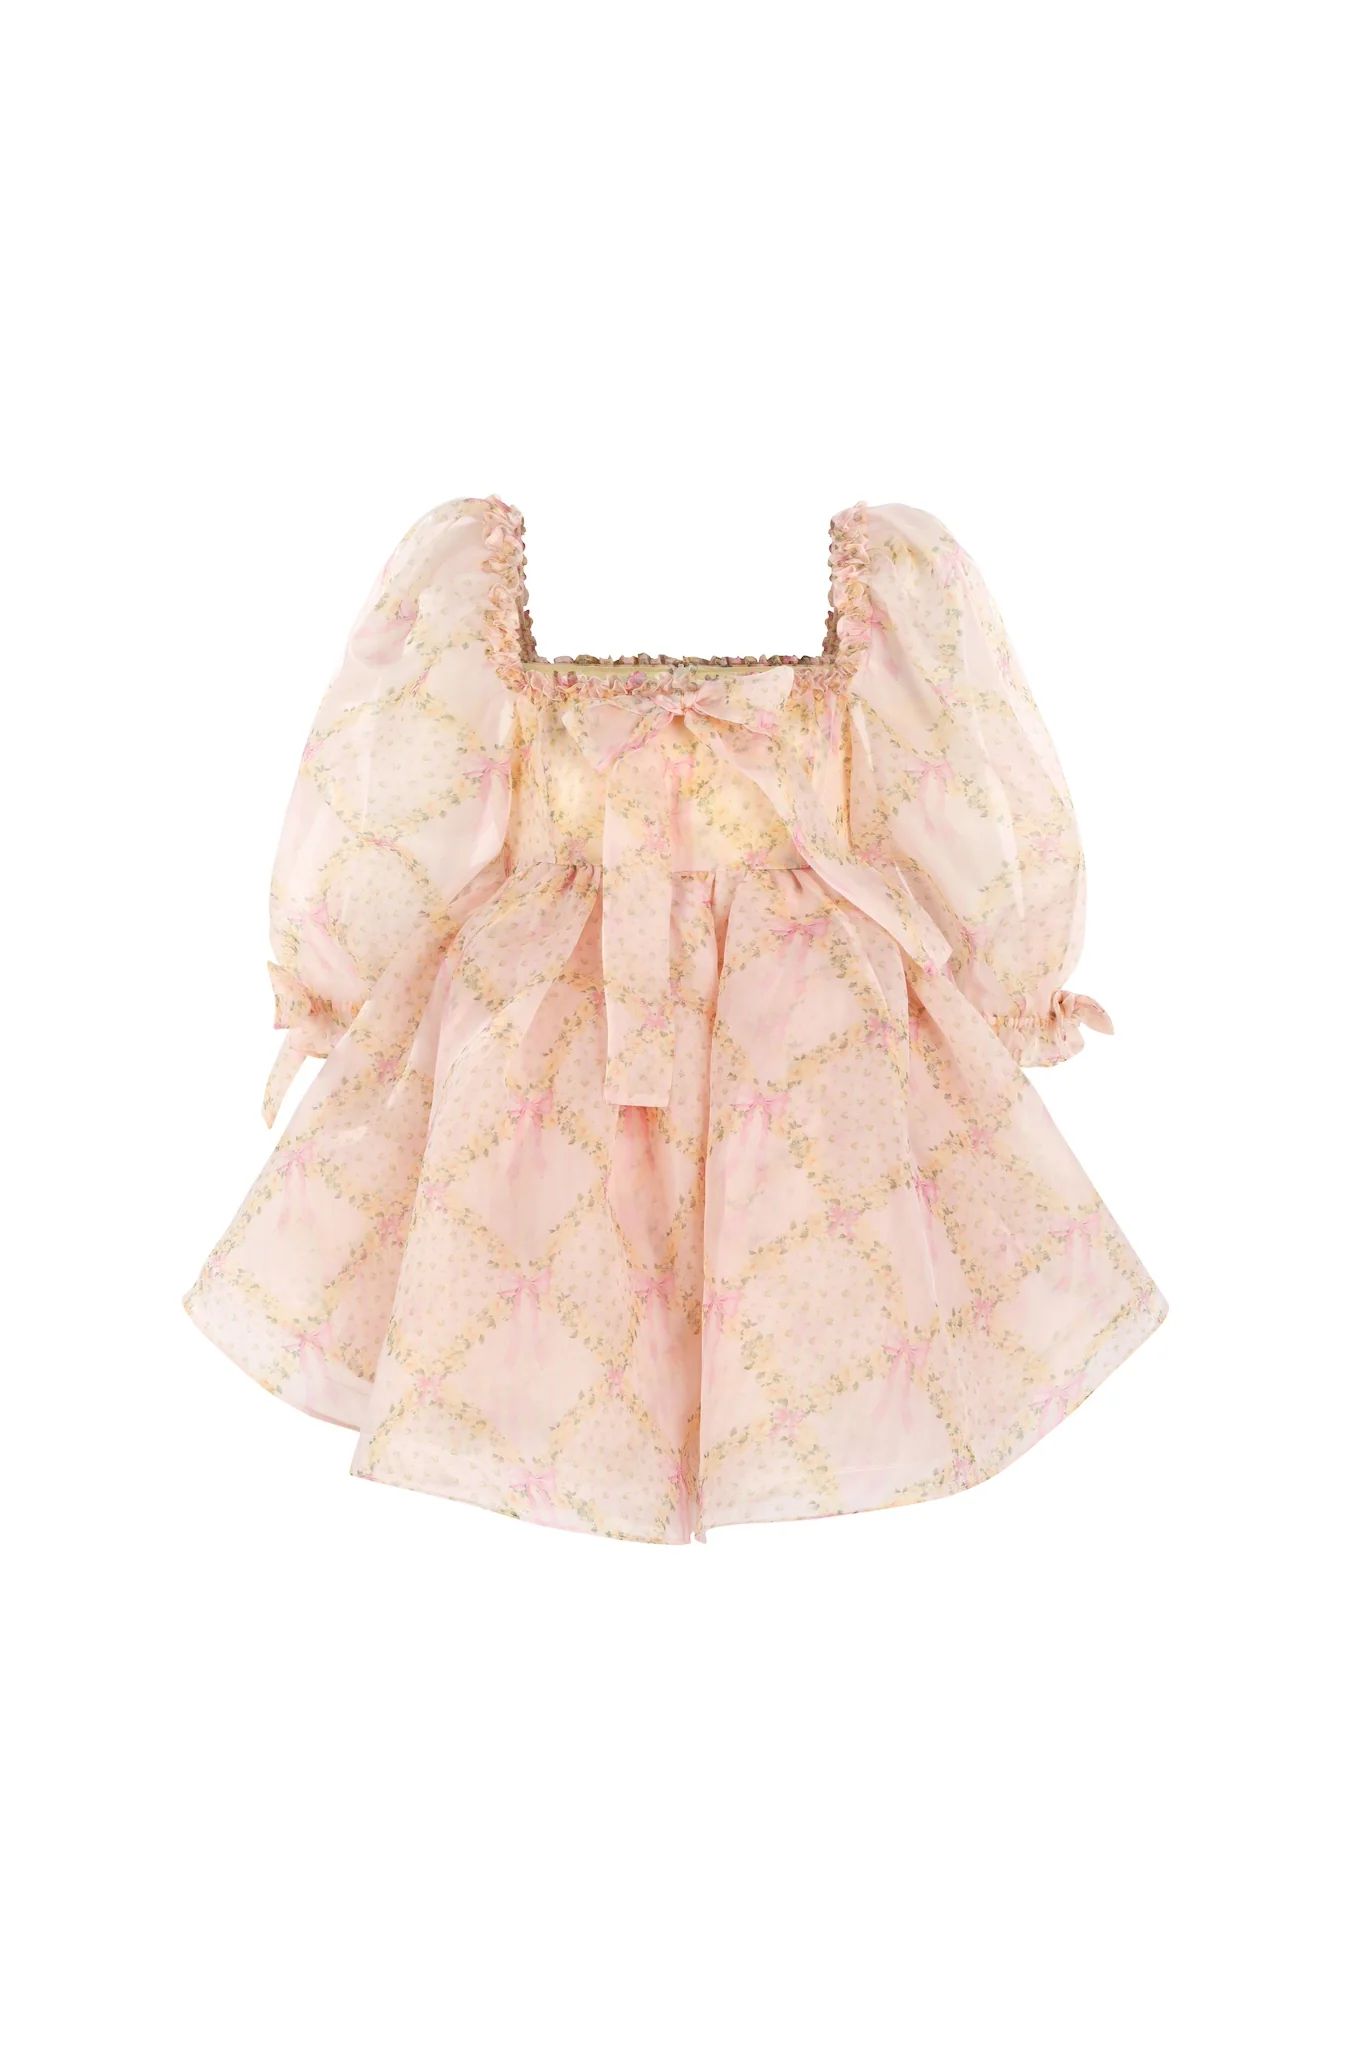 The Duckling Mini Shabby Chic Dress | Selkie Collection